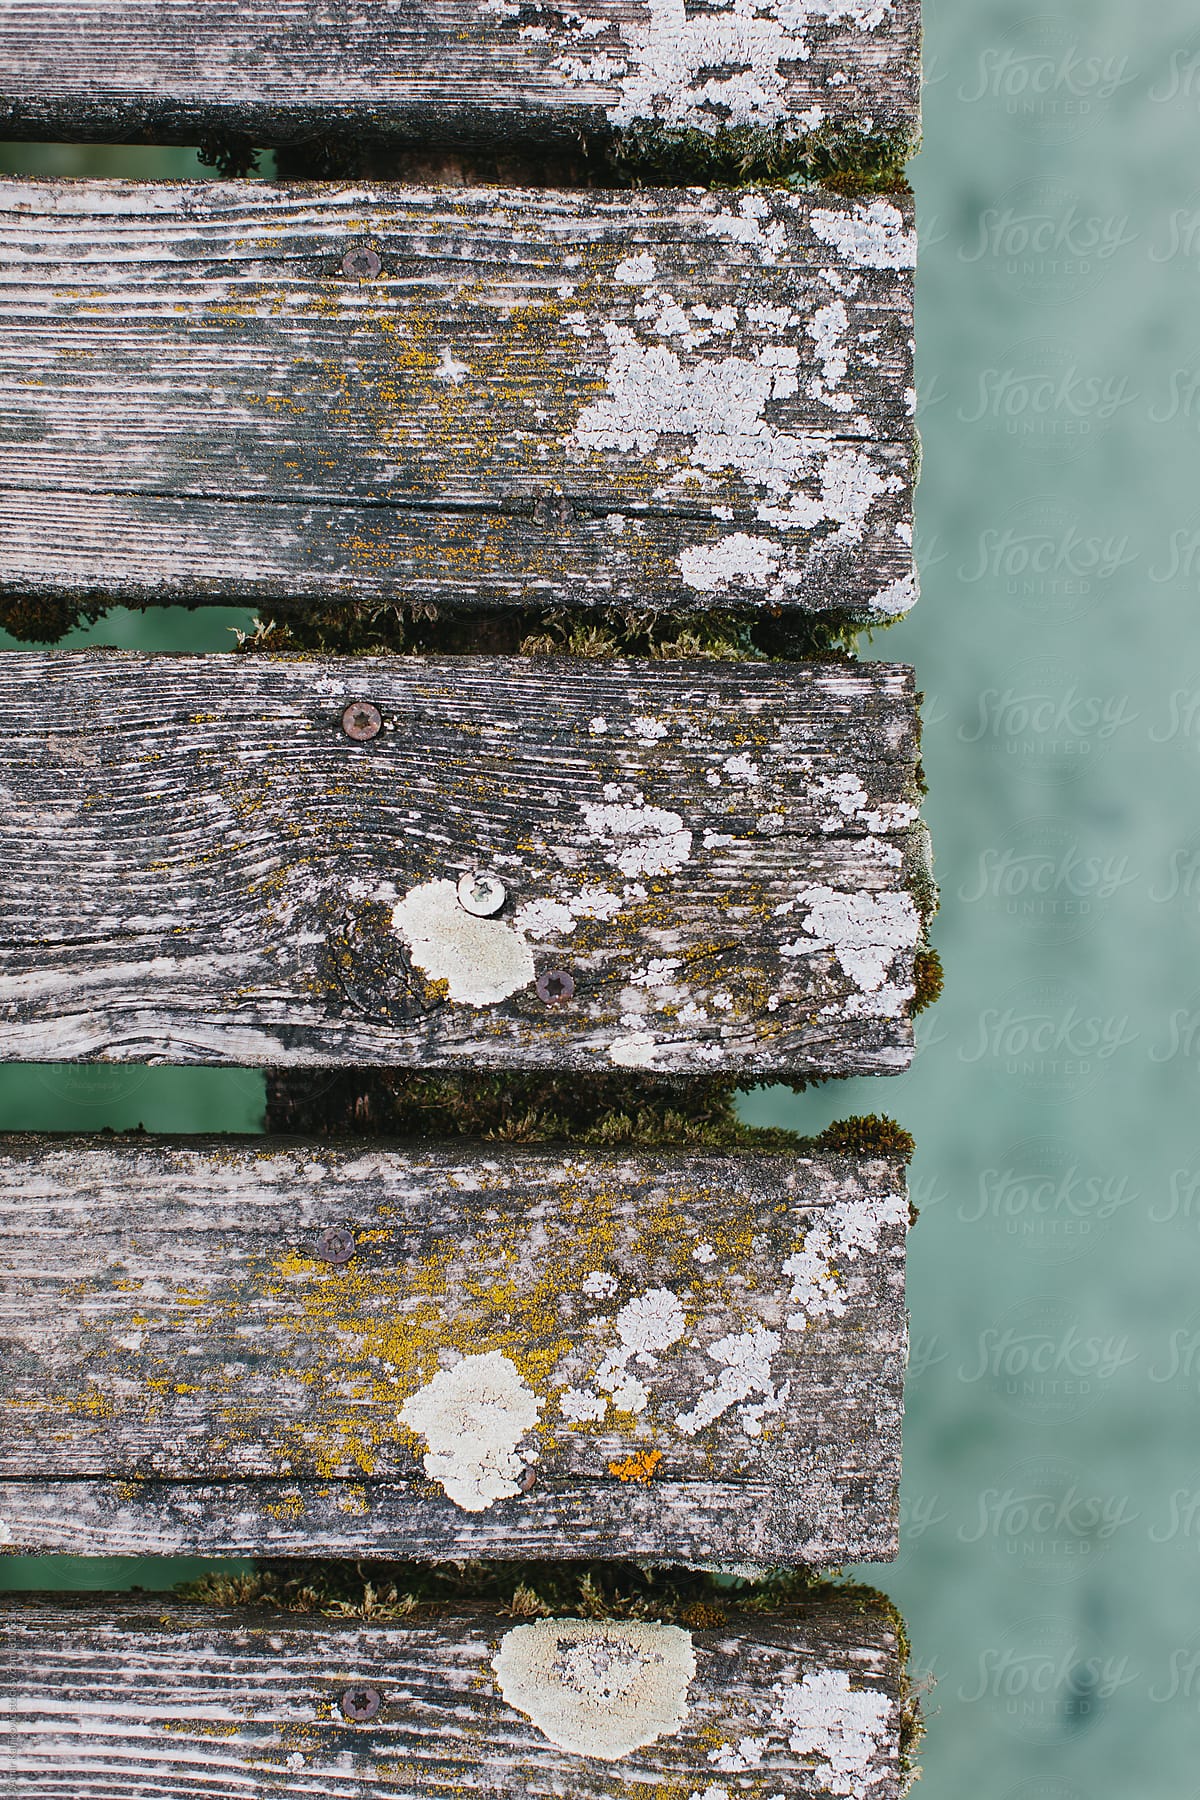 Old weathered wooden planks of a bridge